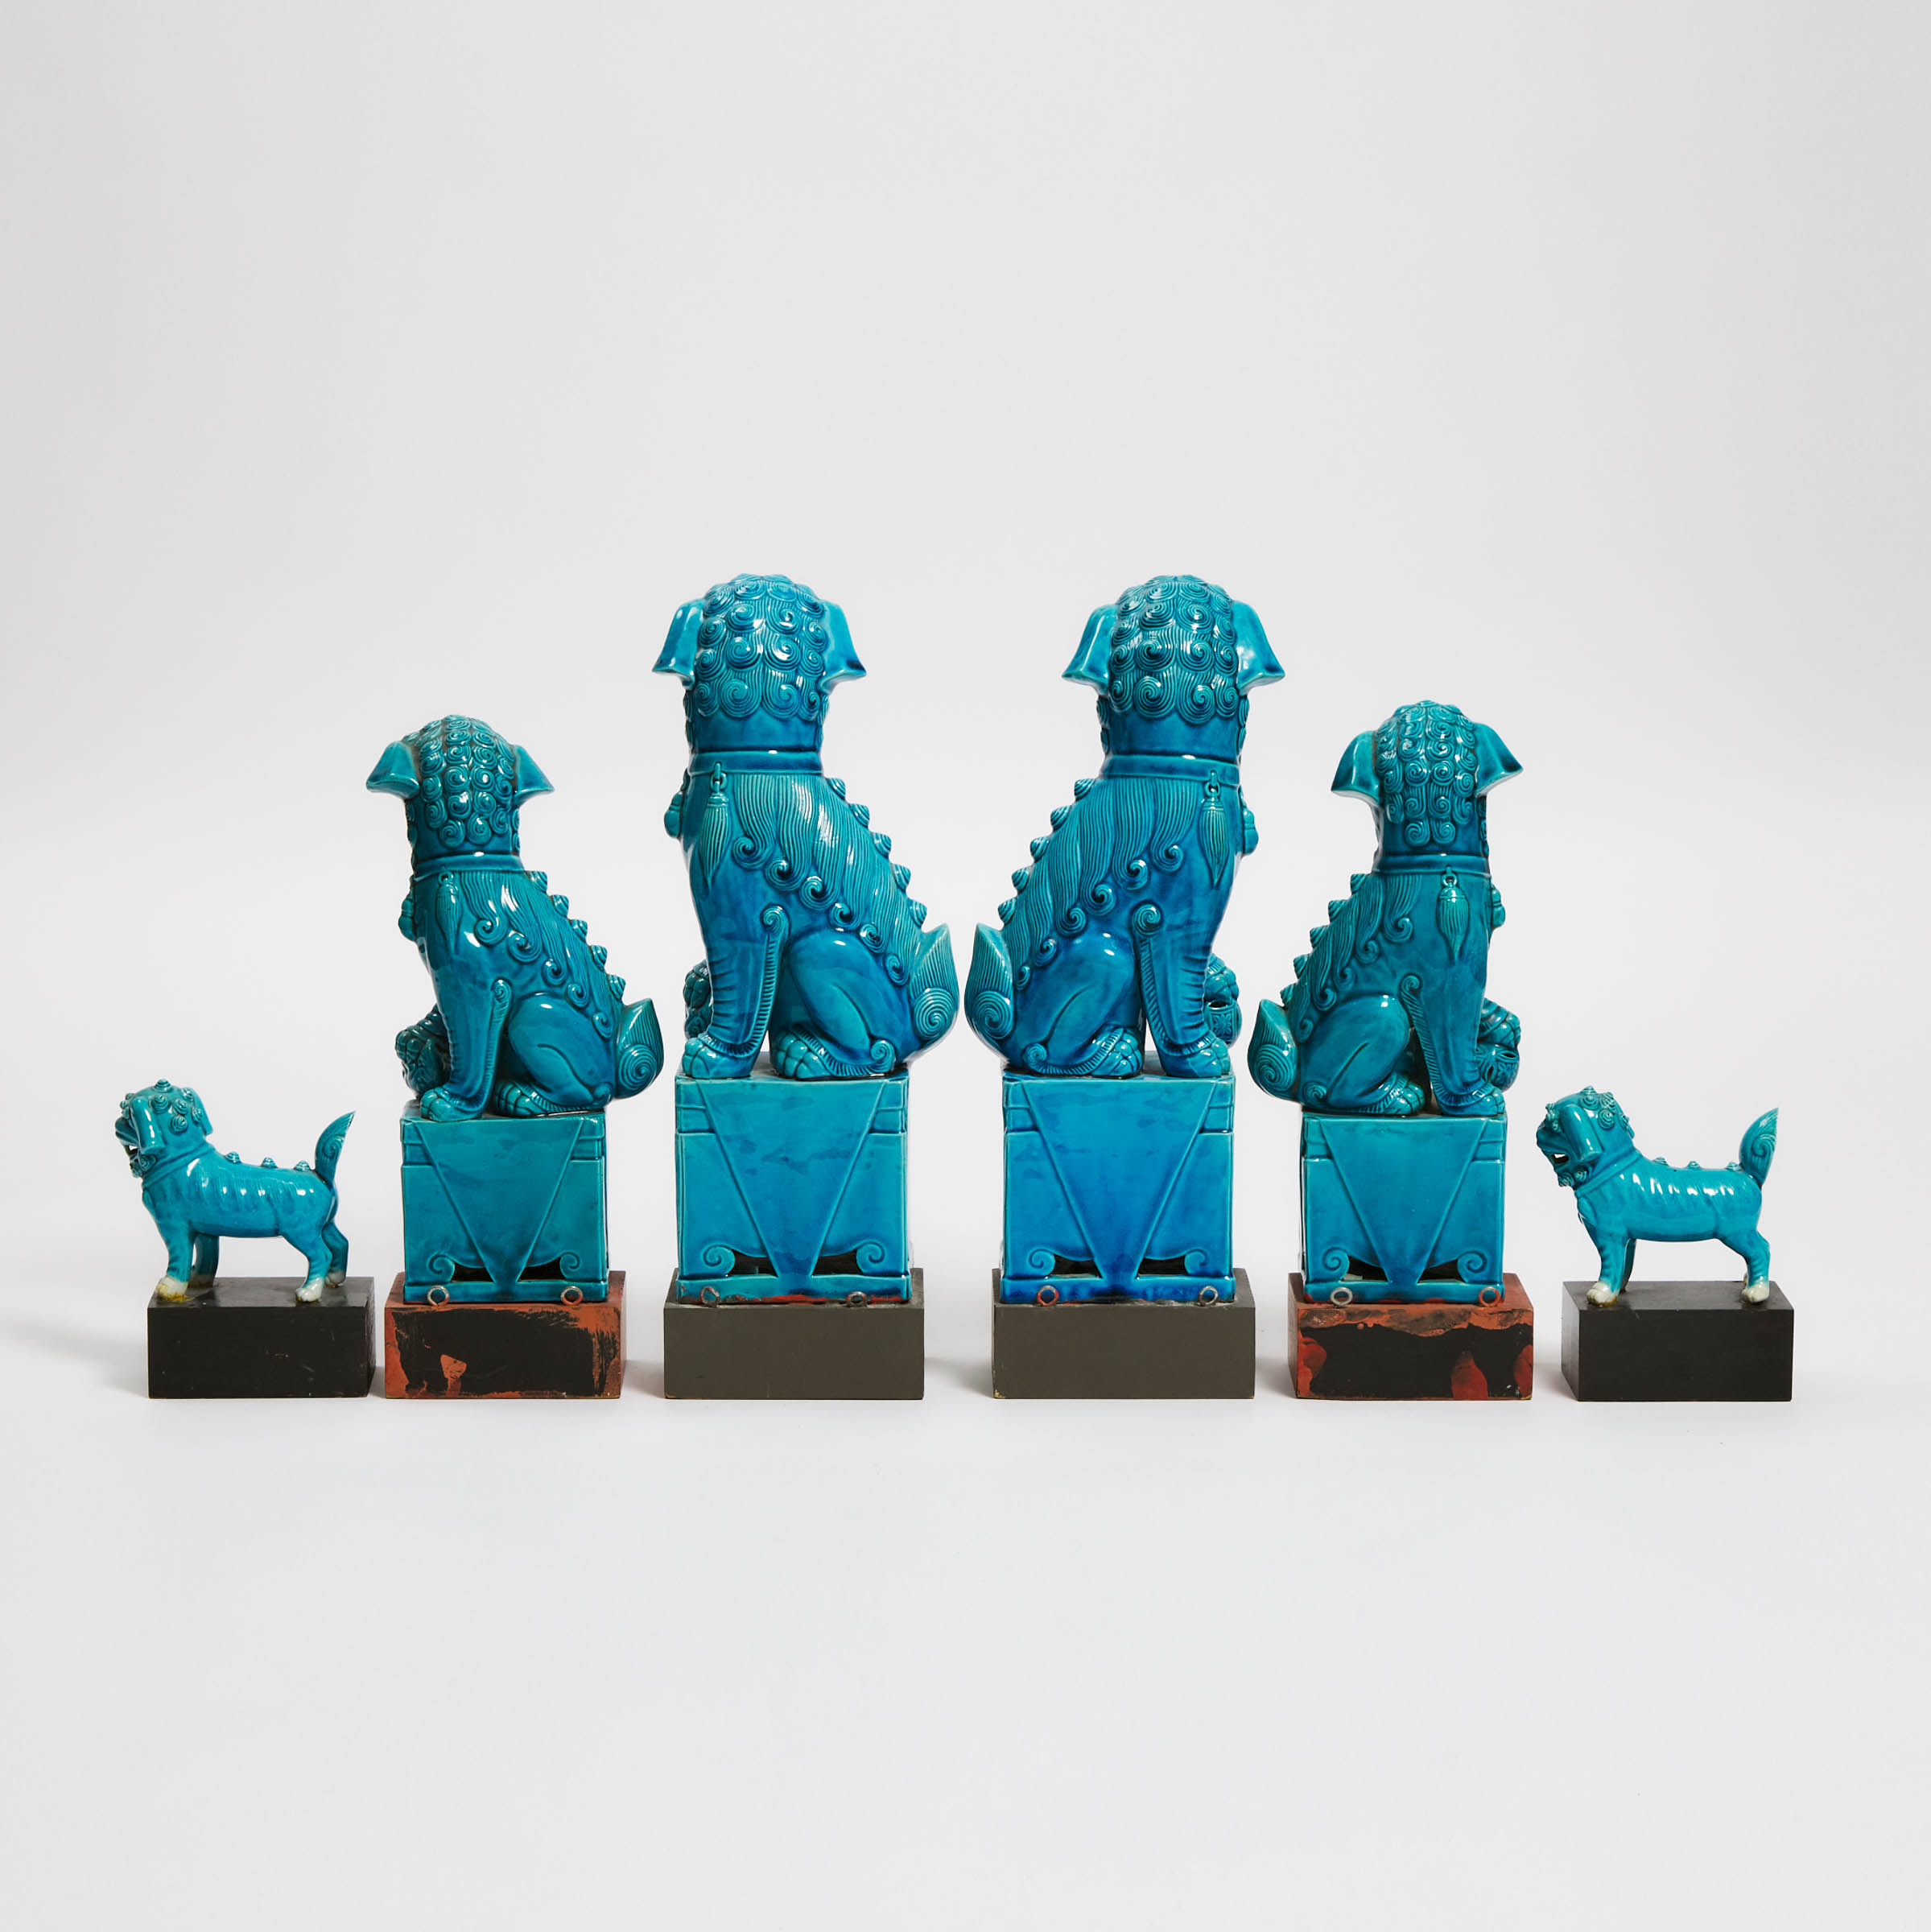 A Group of Six Blue-Glazed Buddhist Lions, Republican Period (1912-1949)